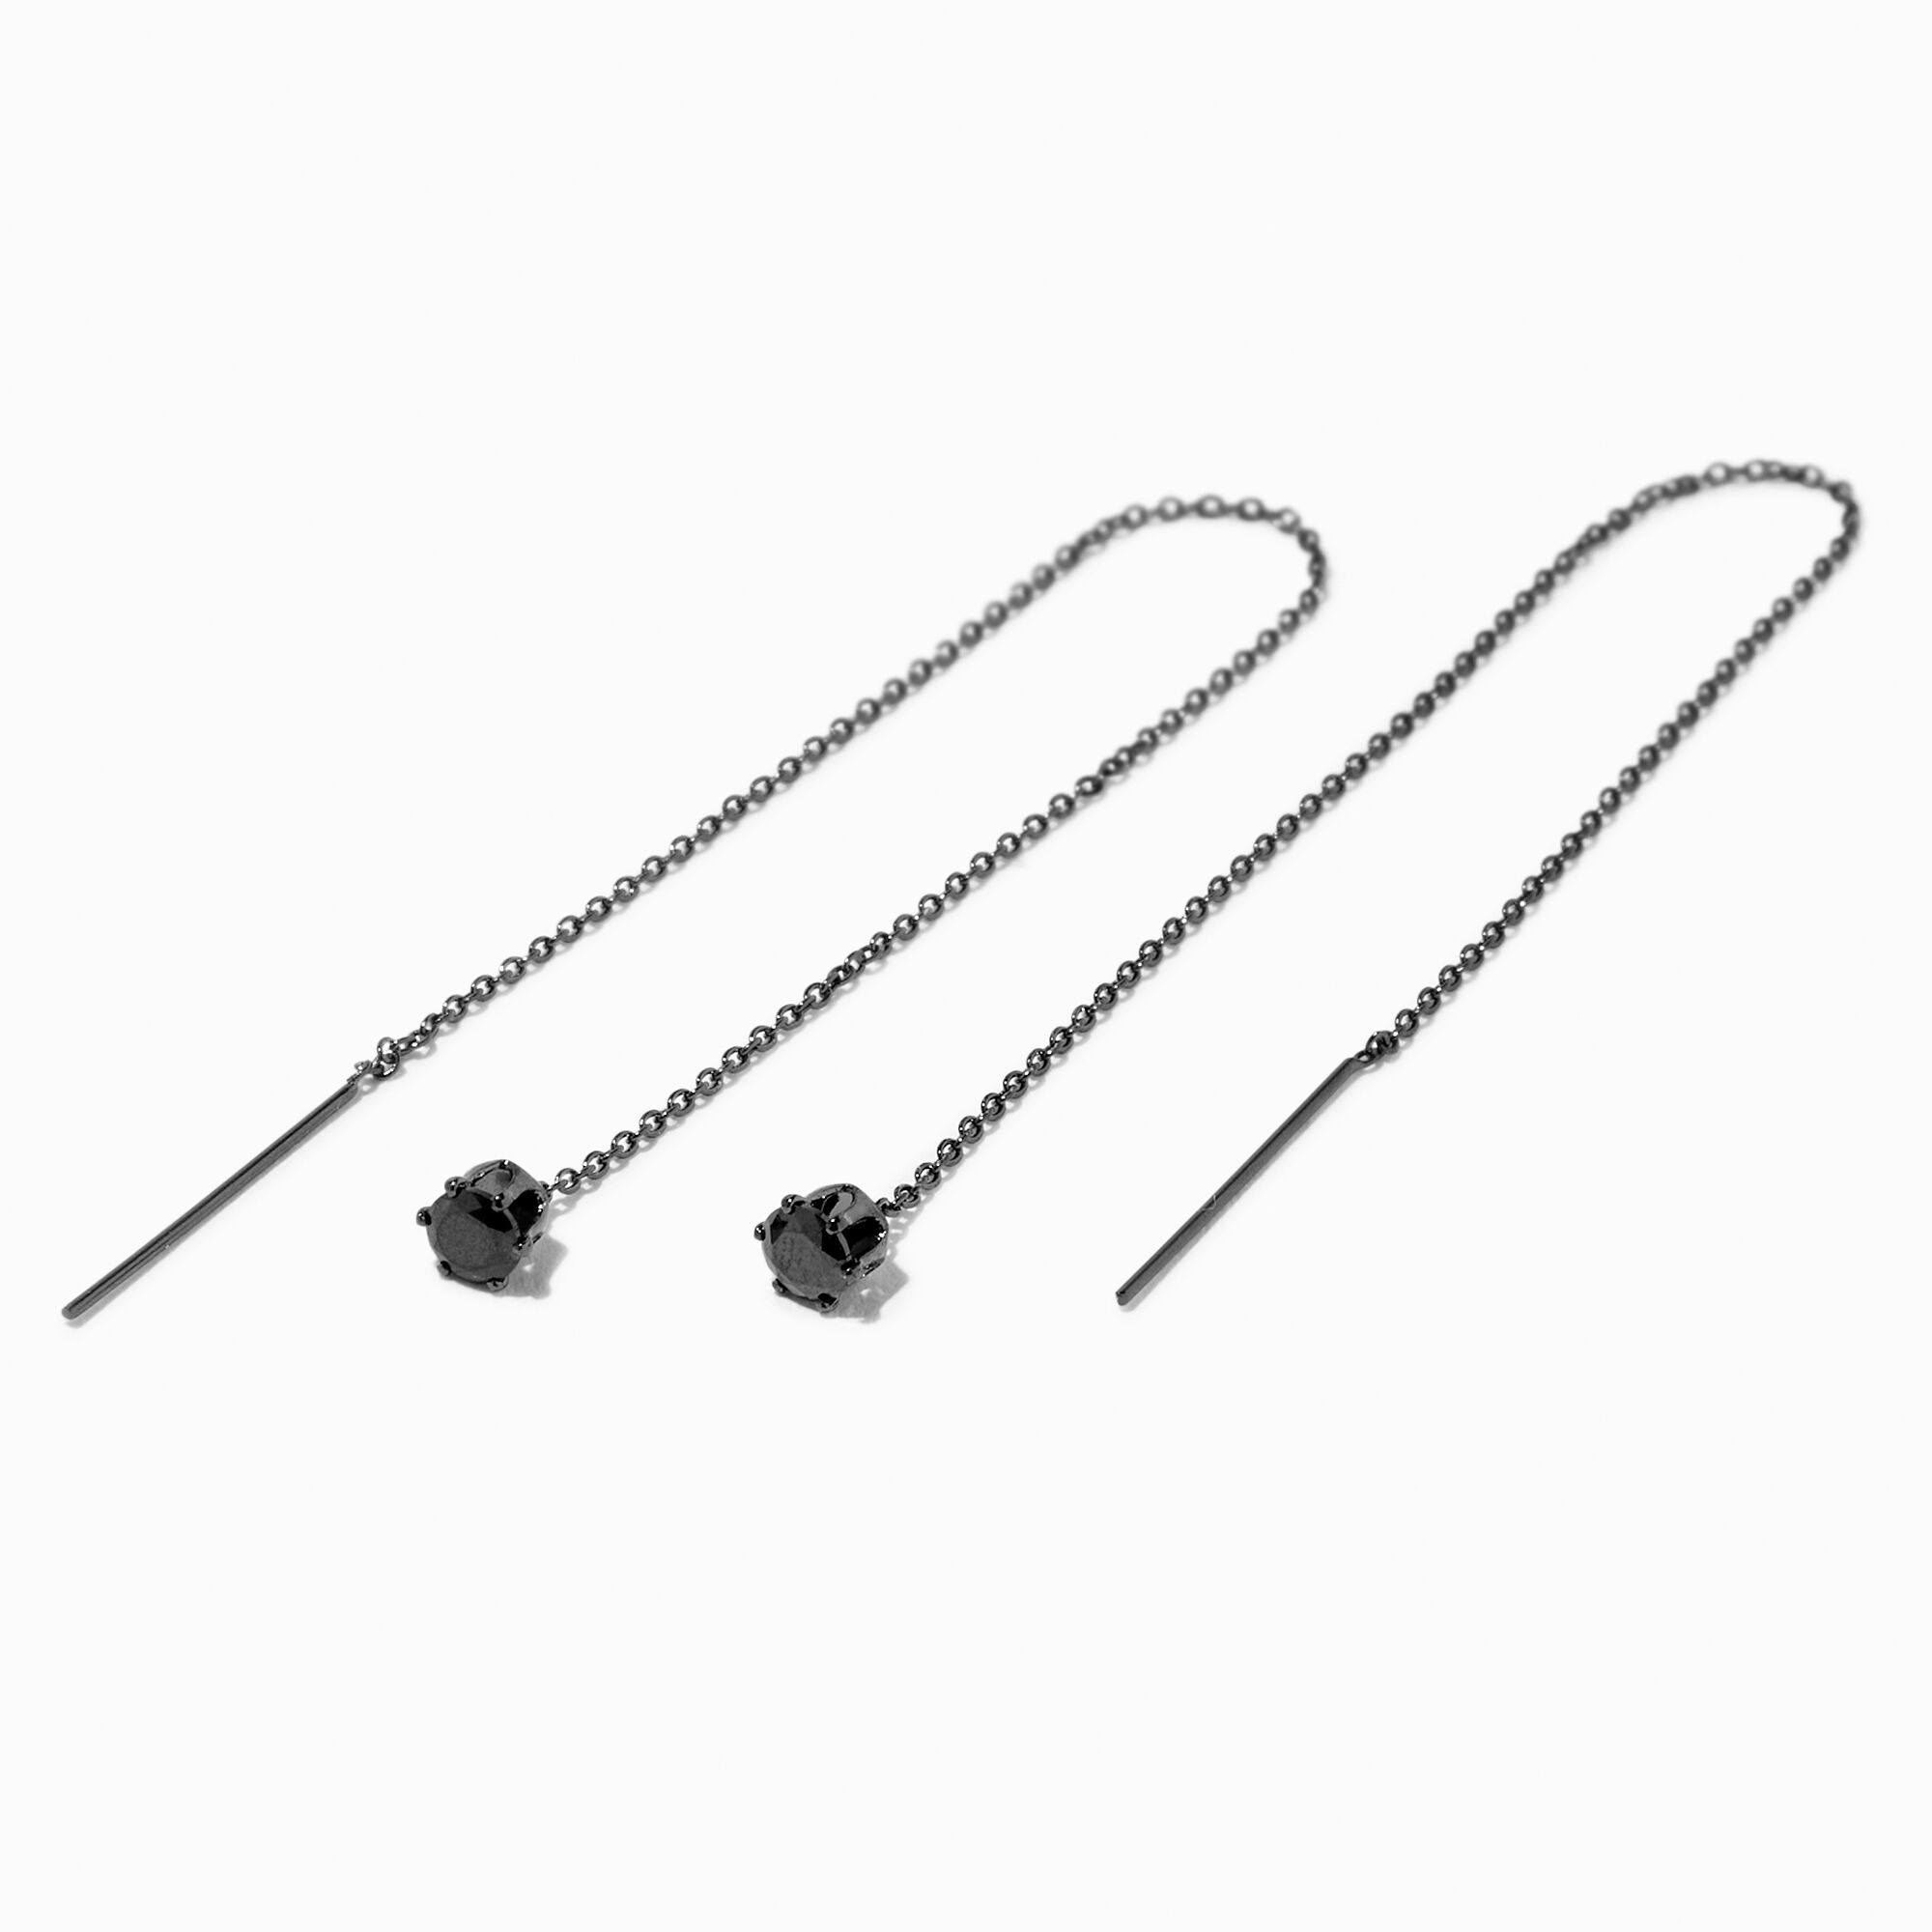 View Claires 5 Stone Threader Drop Earrings Black information